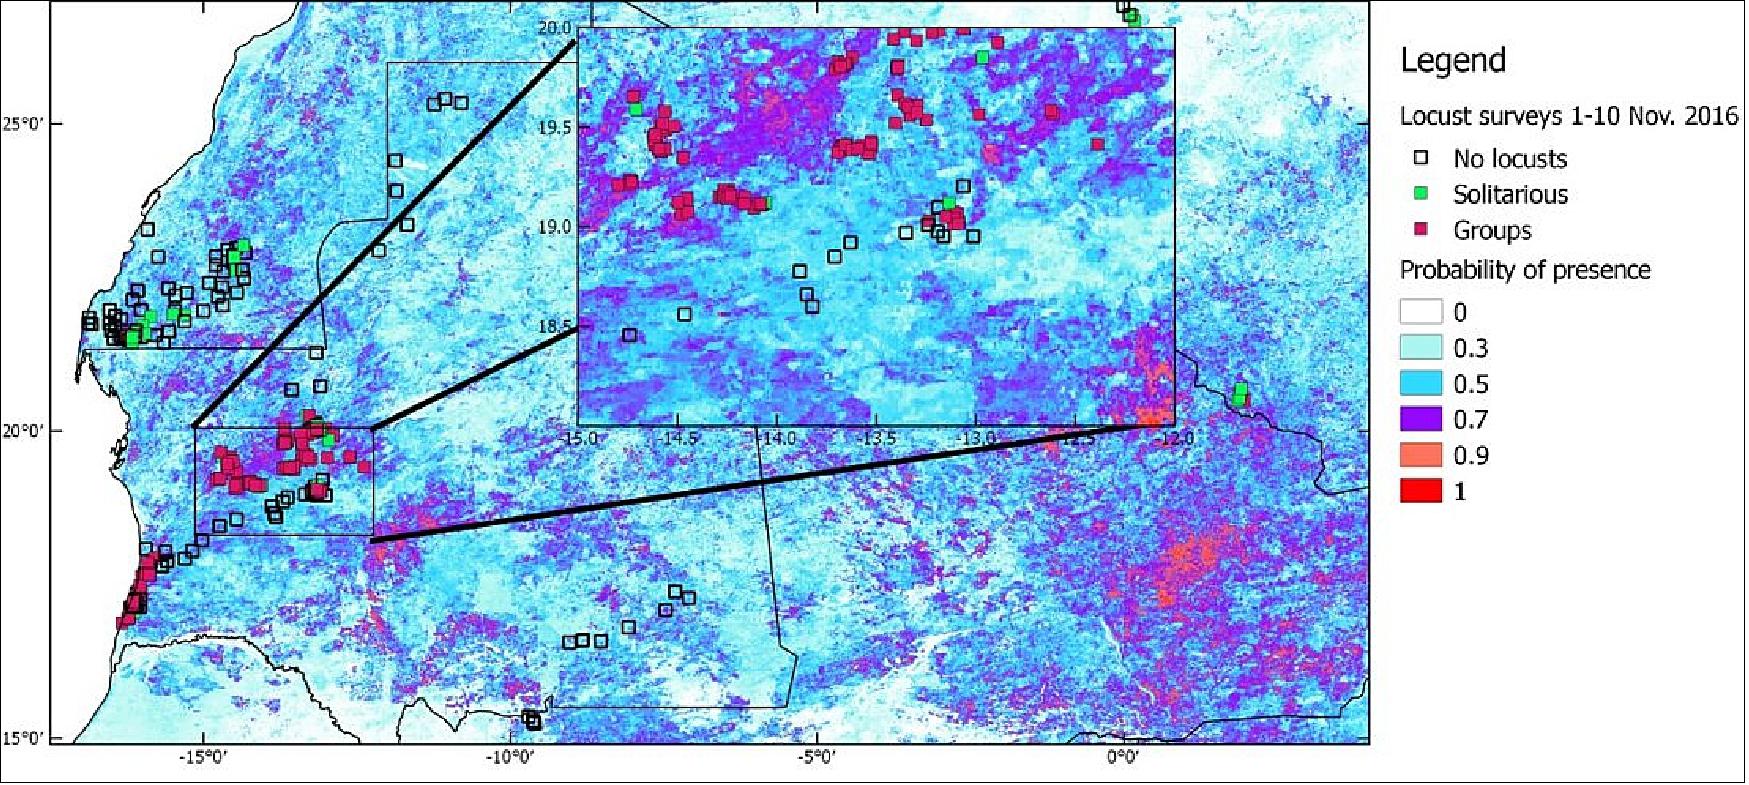 Figure 49: Soil moisture data from the SMOS satellite and NASA's MODIS instrument acquired between July and October 2016 were used by isardSAT and CIRAD to create this map showing areas with favorable locust swarming conditions (in red) during the November 2016 outbreak (image credit: CIRAD, SMELLS consortium)